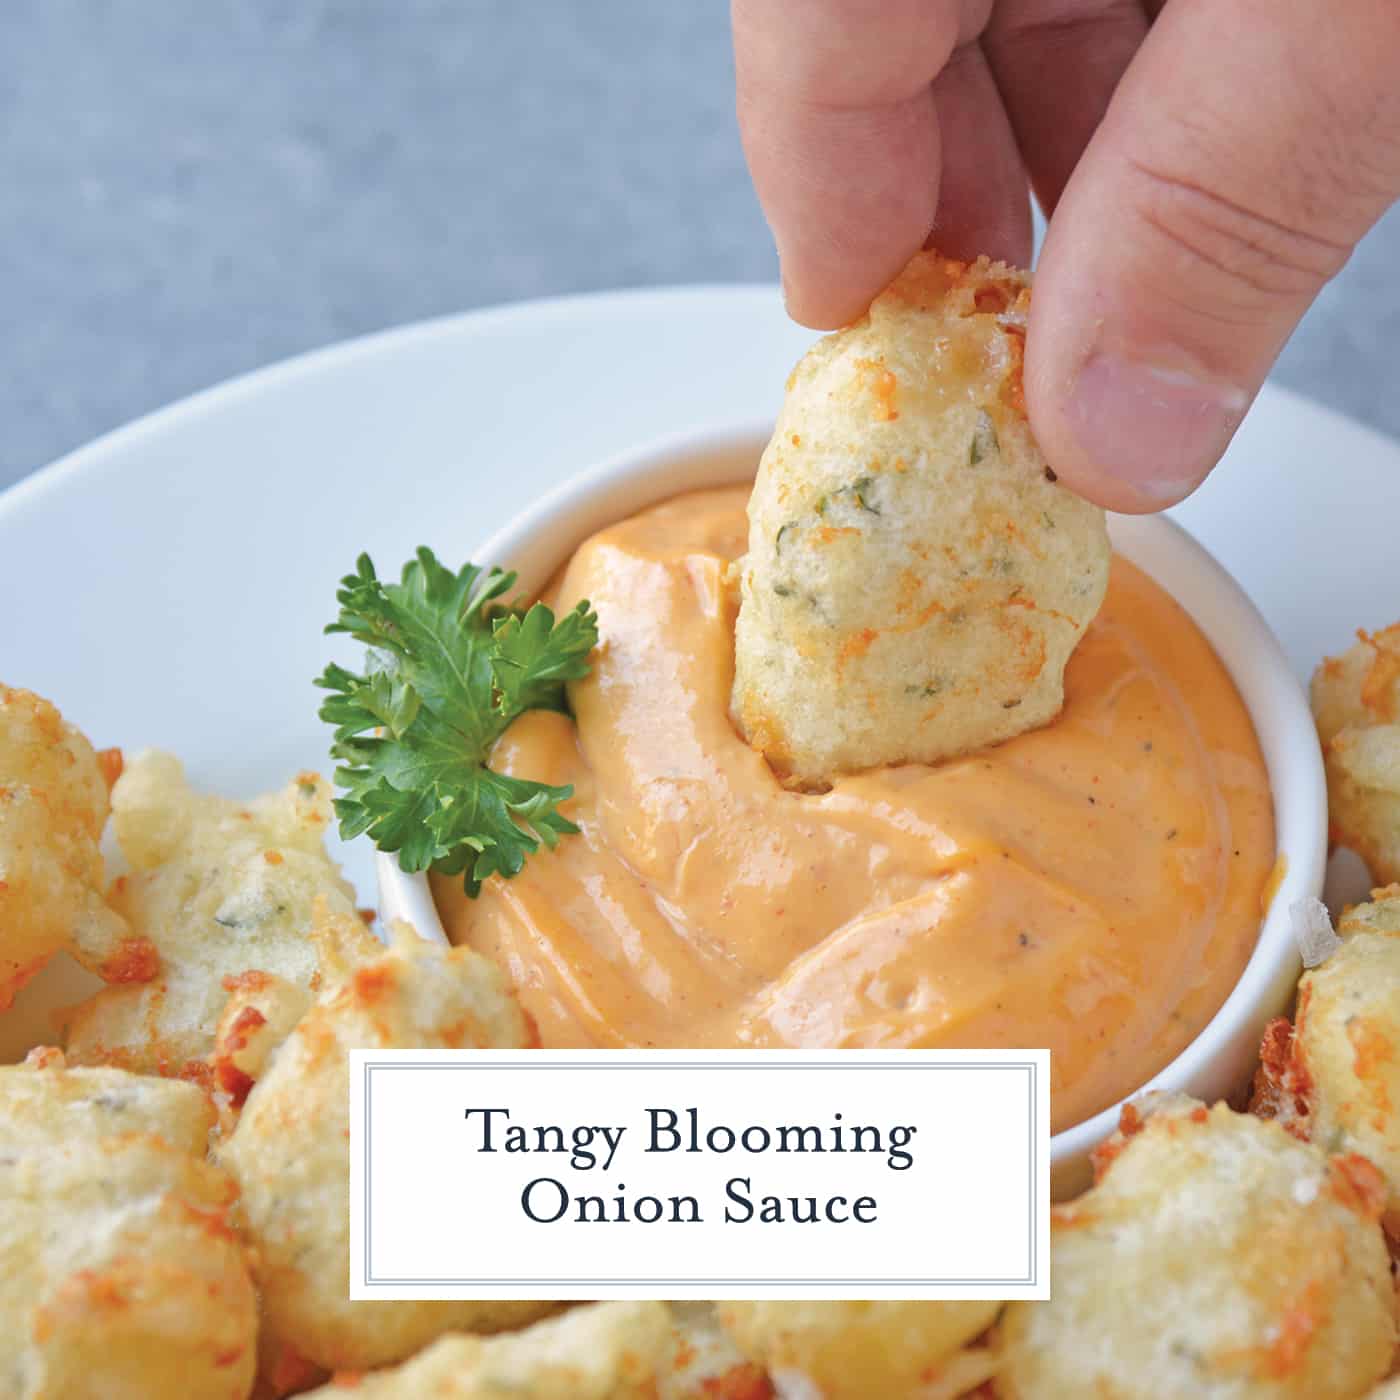 Outback Blooming Onion Sauce is a zesty and fun dipping sauce that can be made in just 5 minutes. Versatile and perfect for serving with nearly anything! #bloomsauce #bloomingonionsauce www.savoryexperiments.com